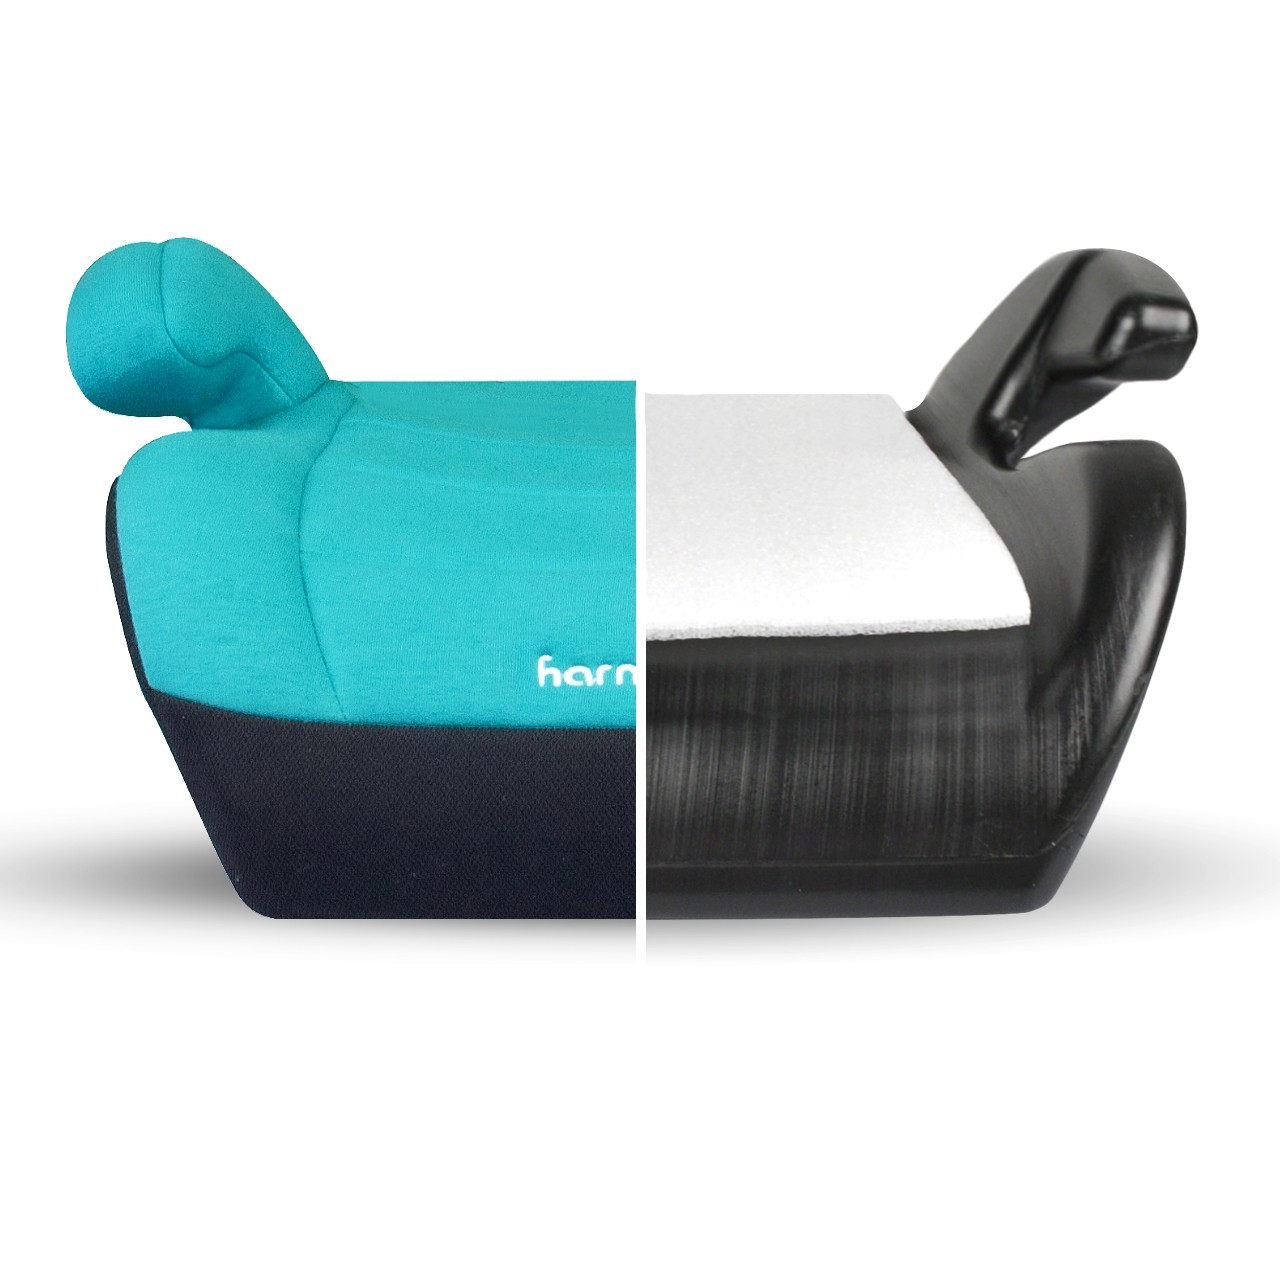 Youth Booster Car Seat - Teal